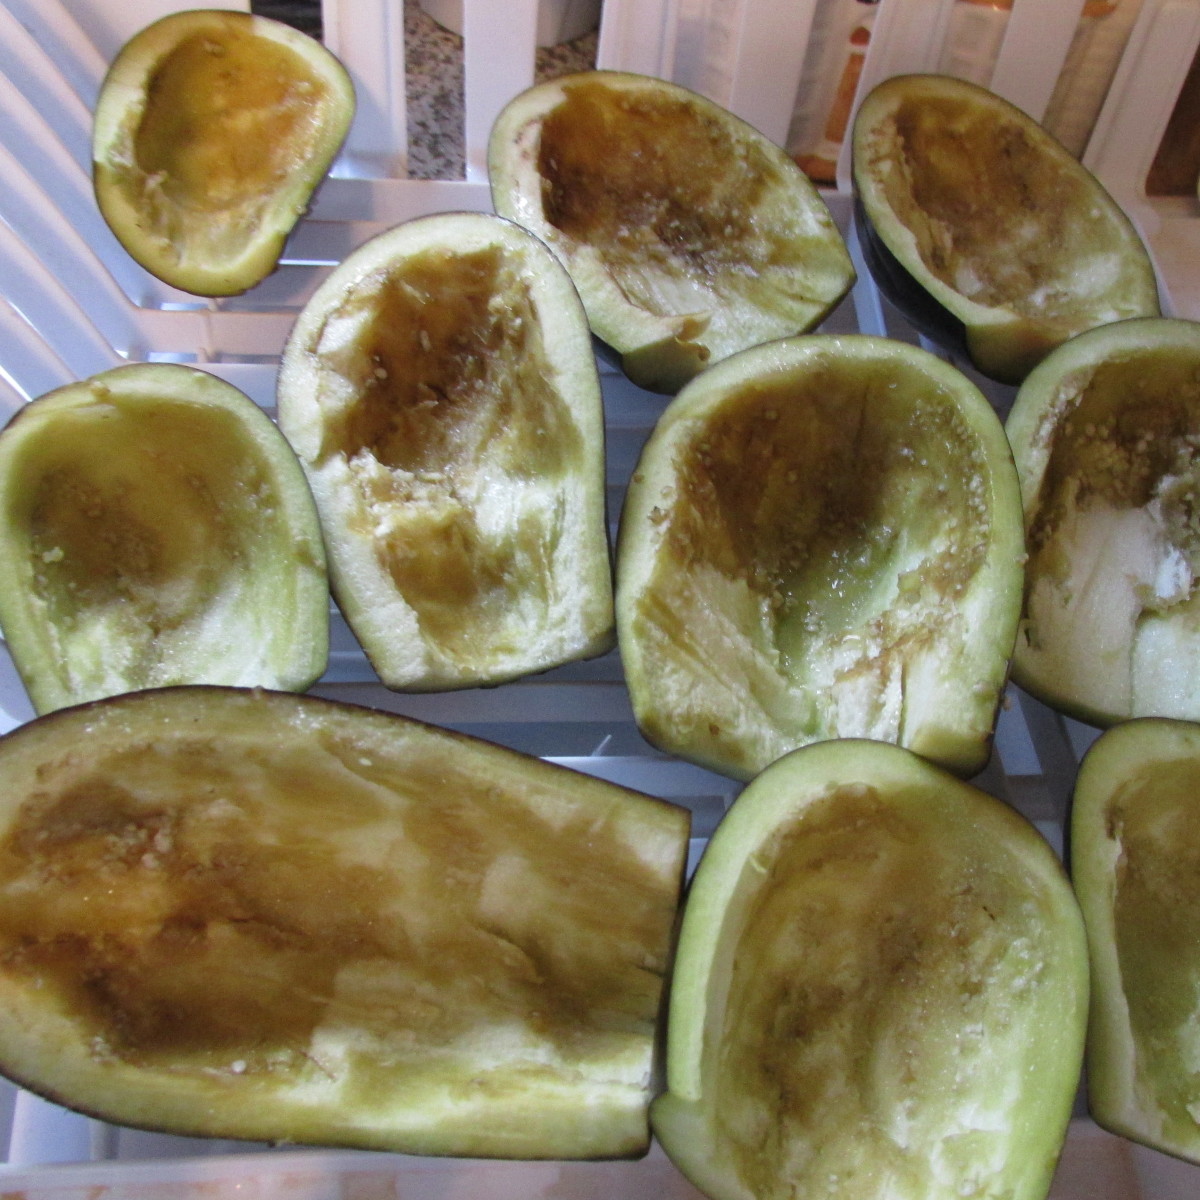 Eggplants after they are scooped out,  salted, and sitting in a drainer